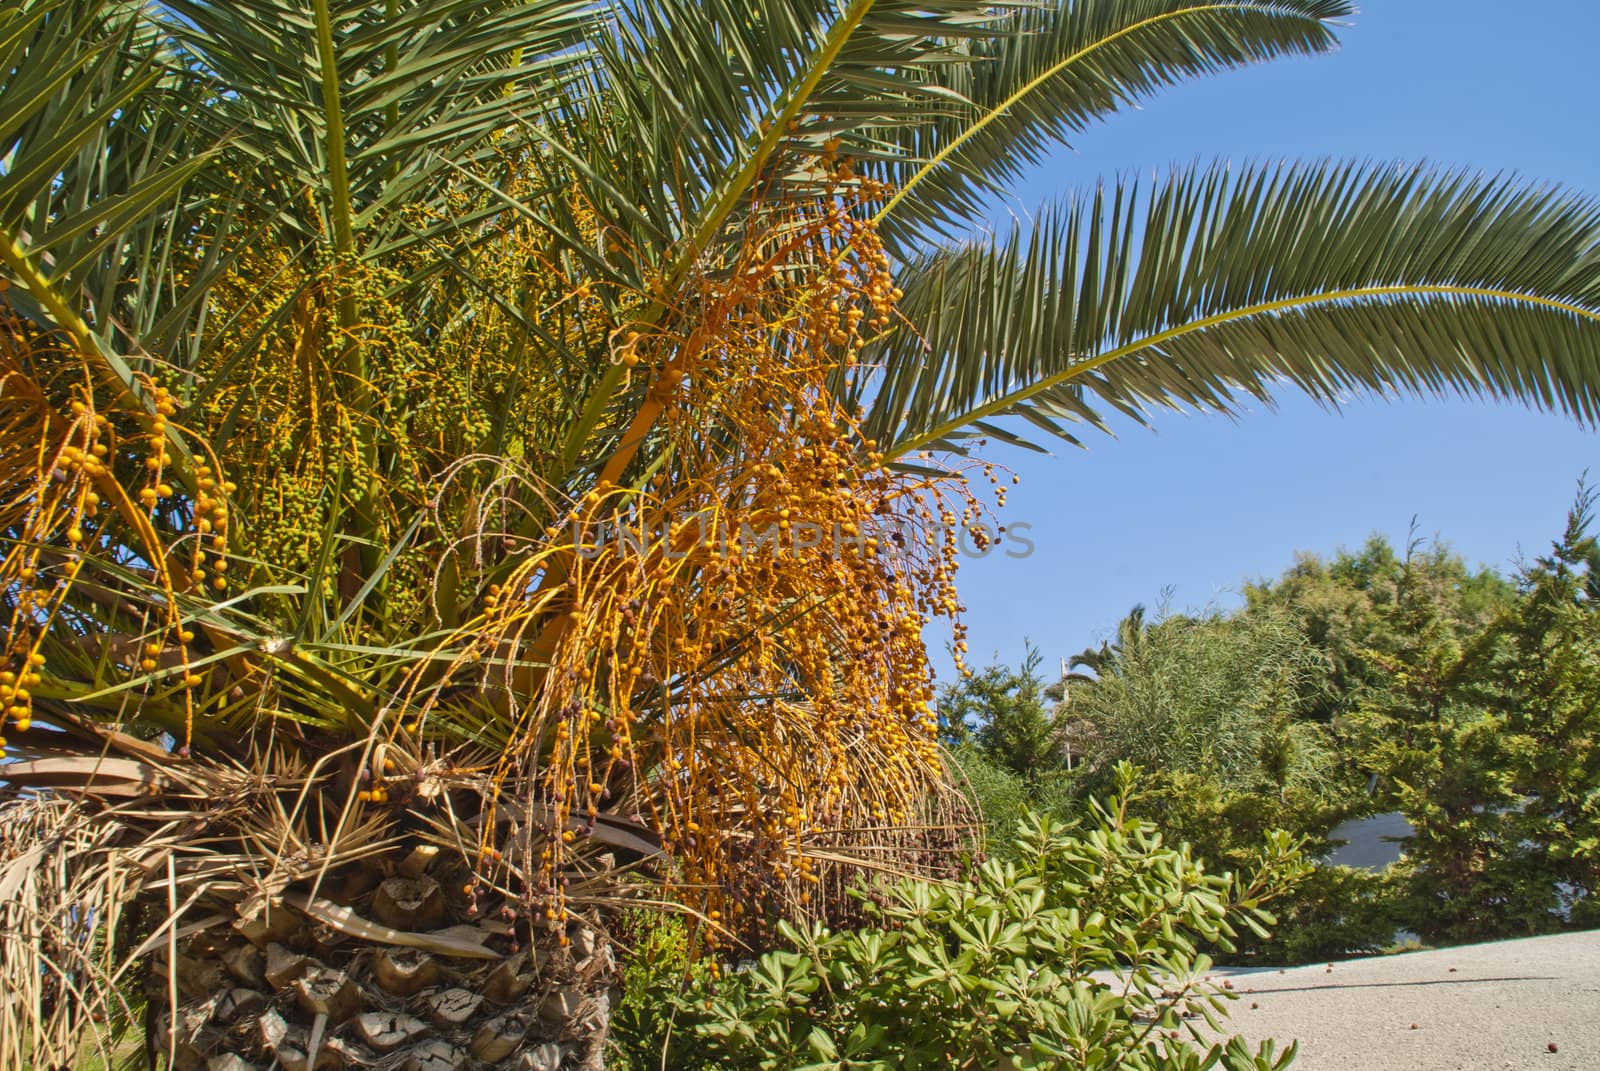 around the Hotel Sun Beach Resort in Ixia, Rhodes is it built a lot of great garden with different flowers, palms, shrubs and trees, image is shot when we vacationed in rhodes, autumn 2012